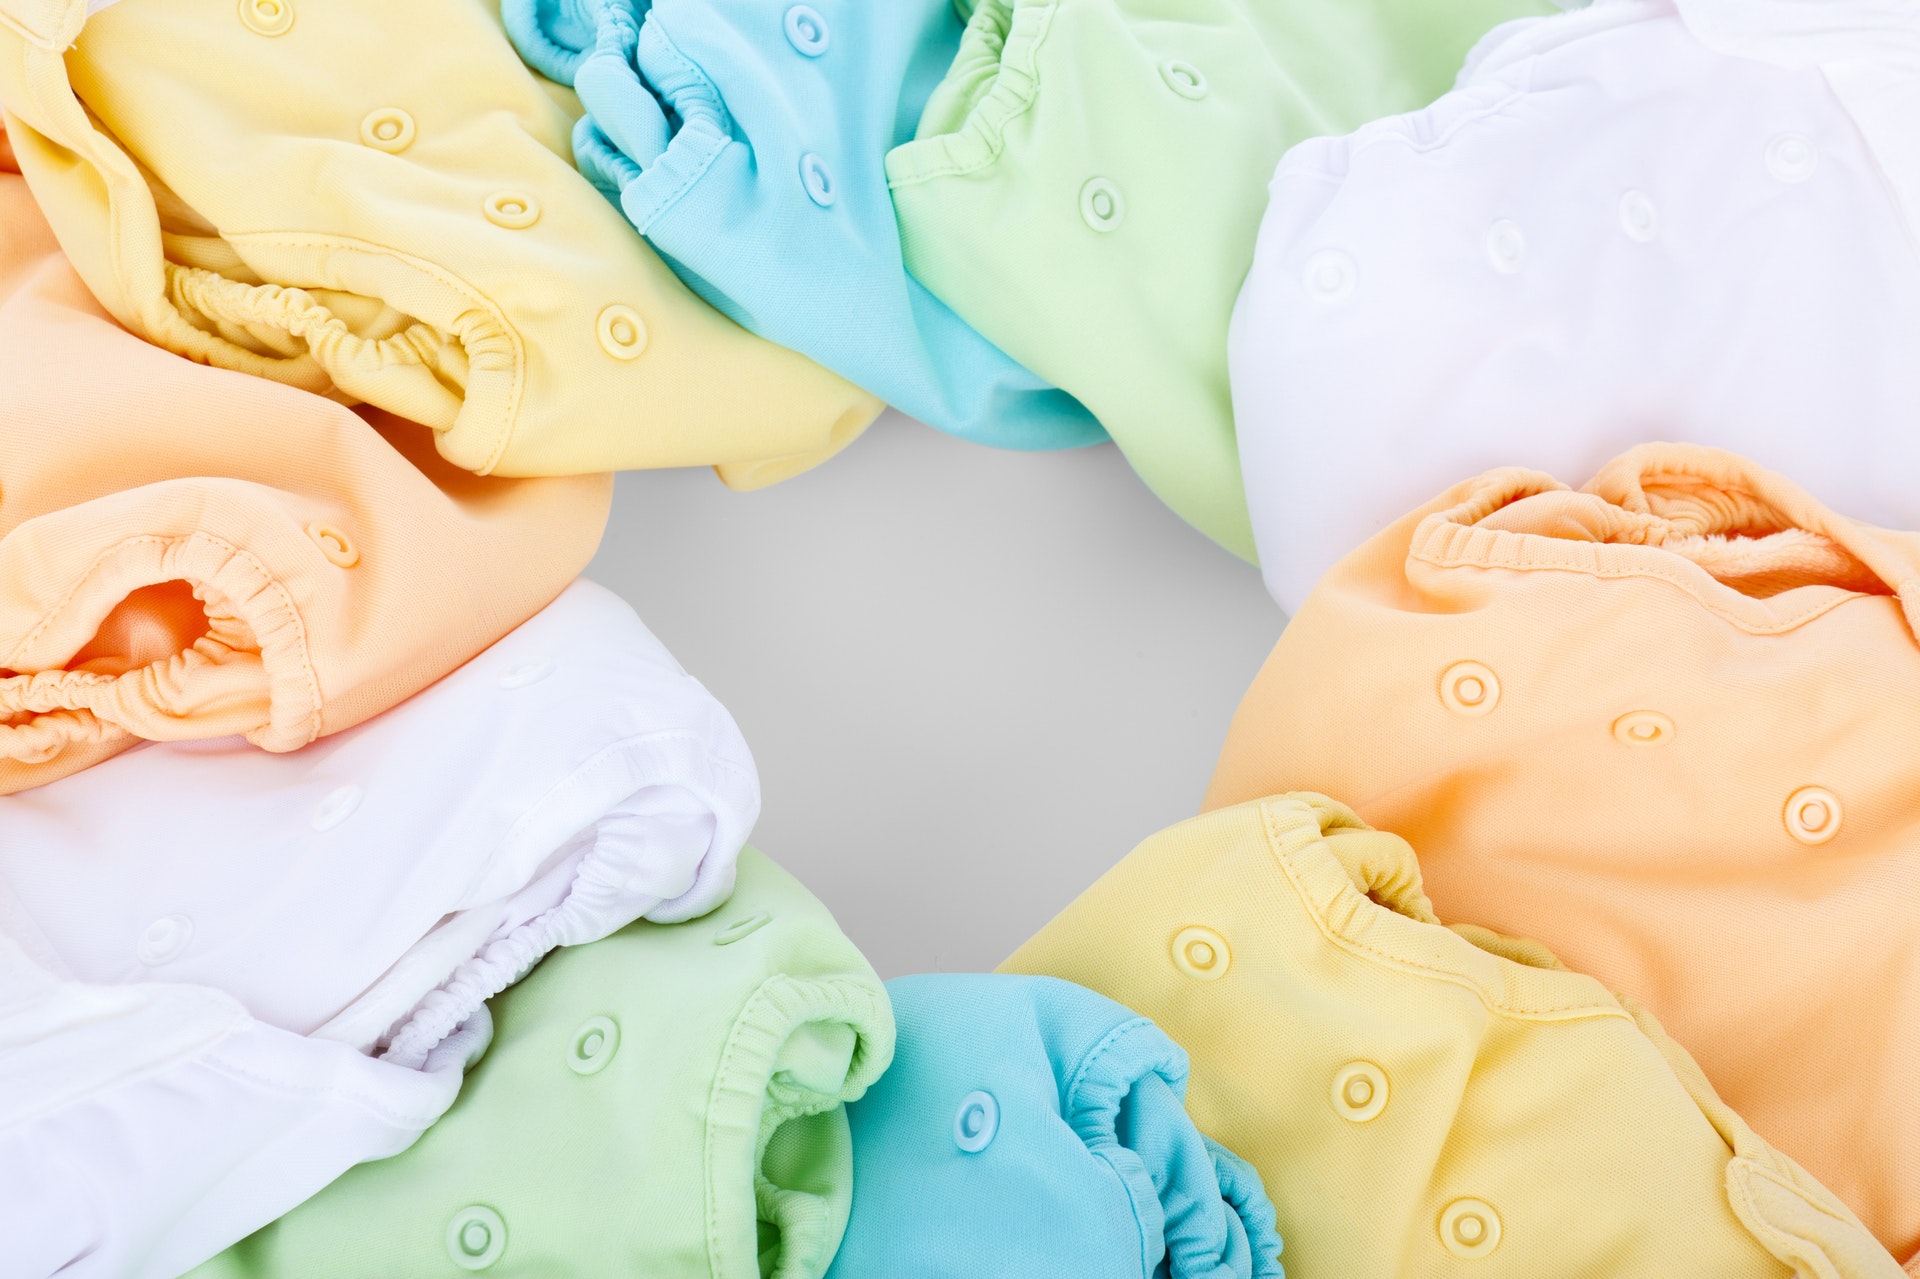 How to Store Dirty Cloth Diapers